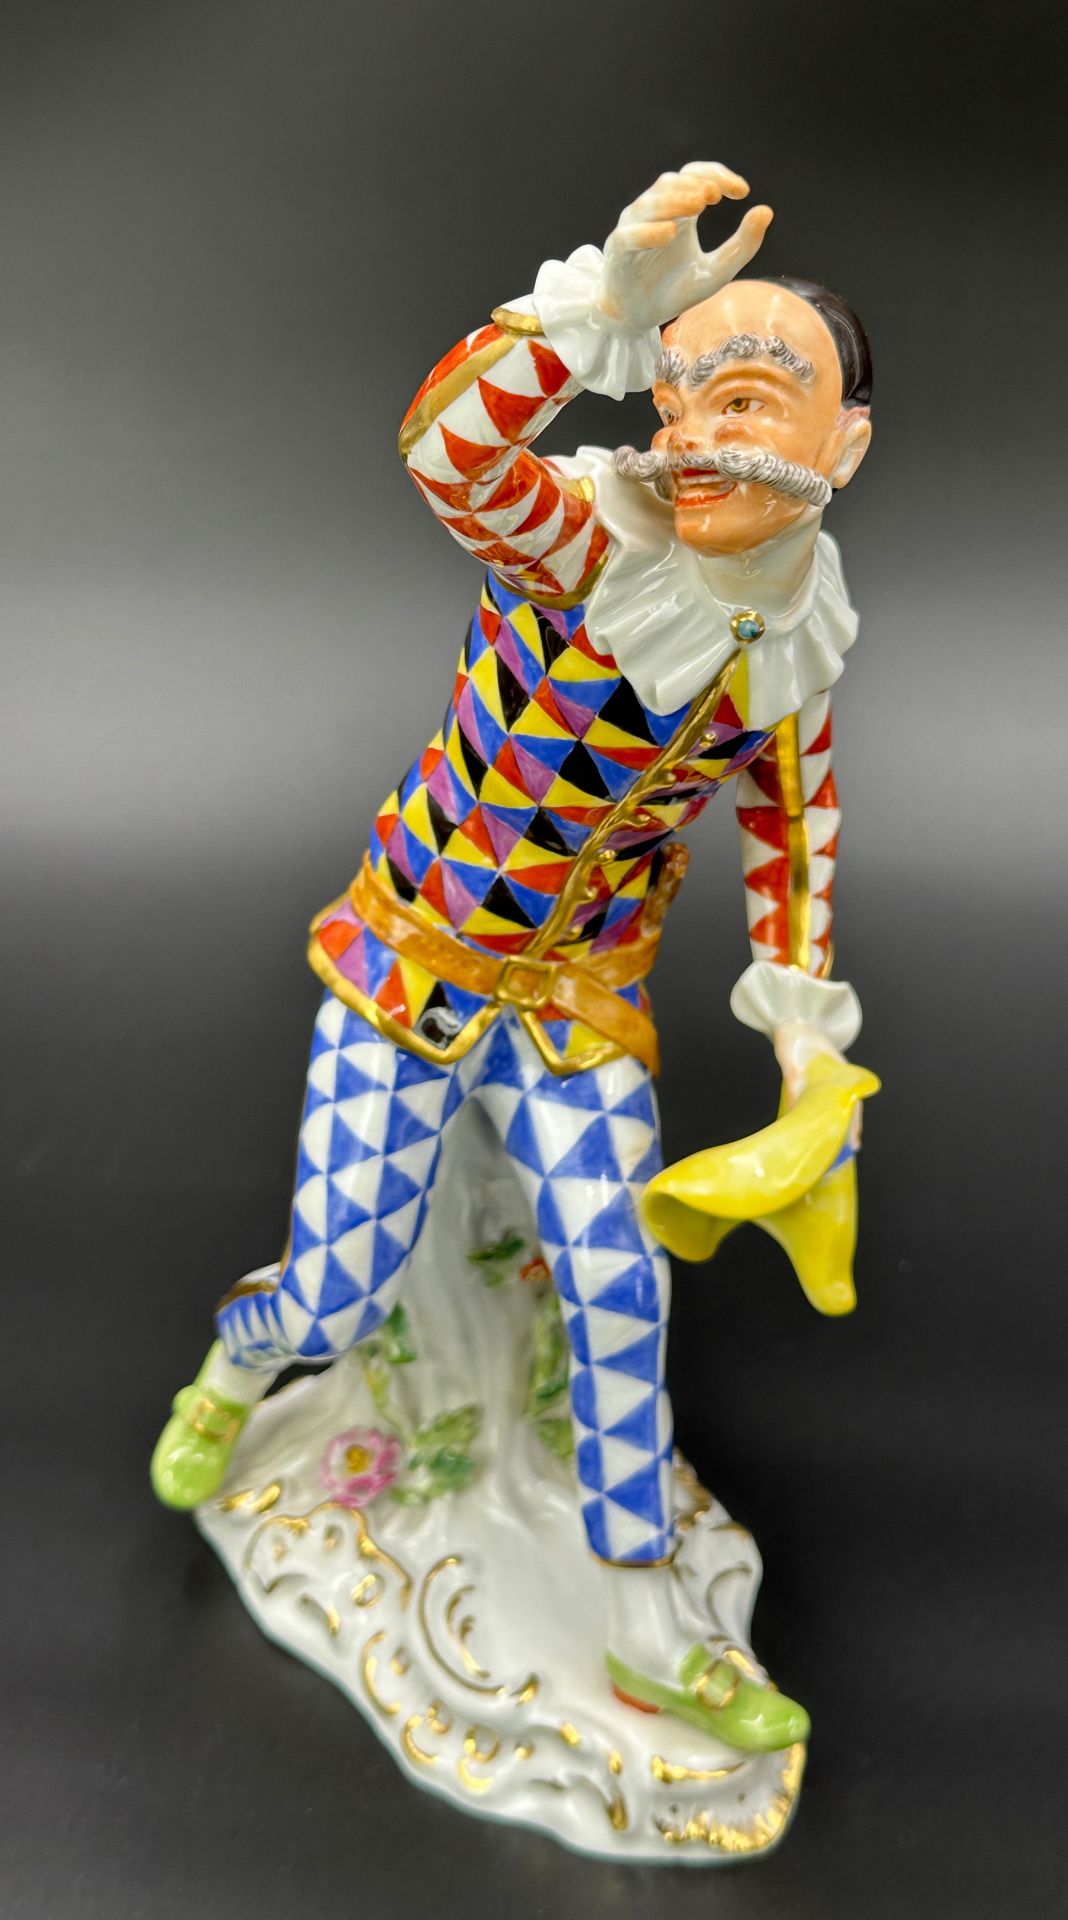 MEISSEN figure. Harlequin with hat. "Commedia dell' Arte". 1st choice. 20th century.